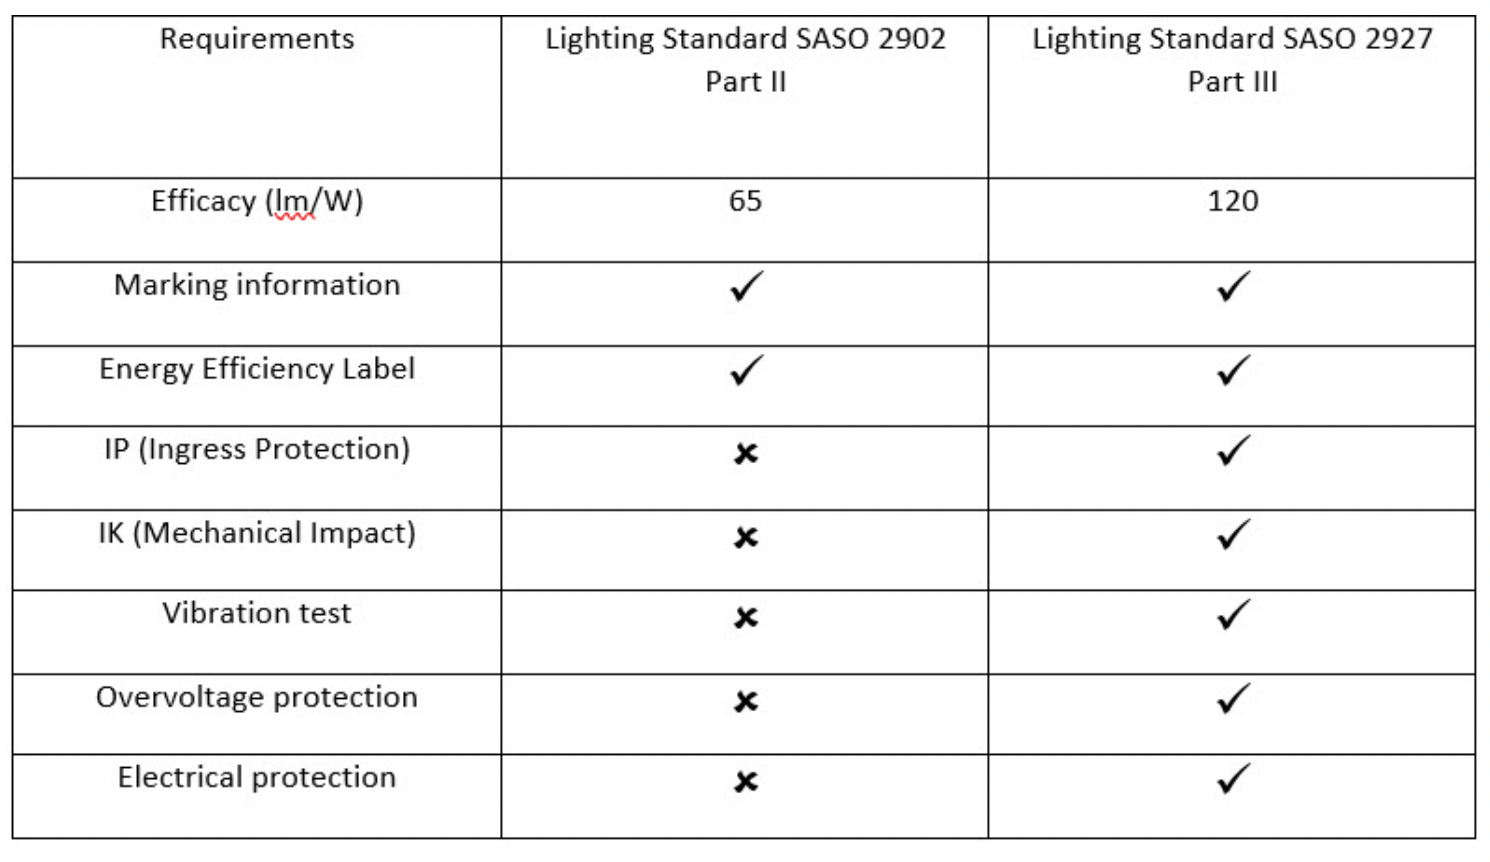 Table showing the new technical requirements added to SASO standard 2927 Part III 